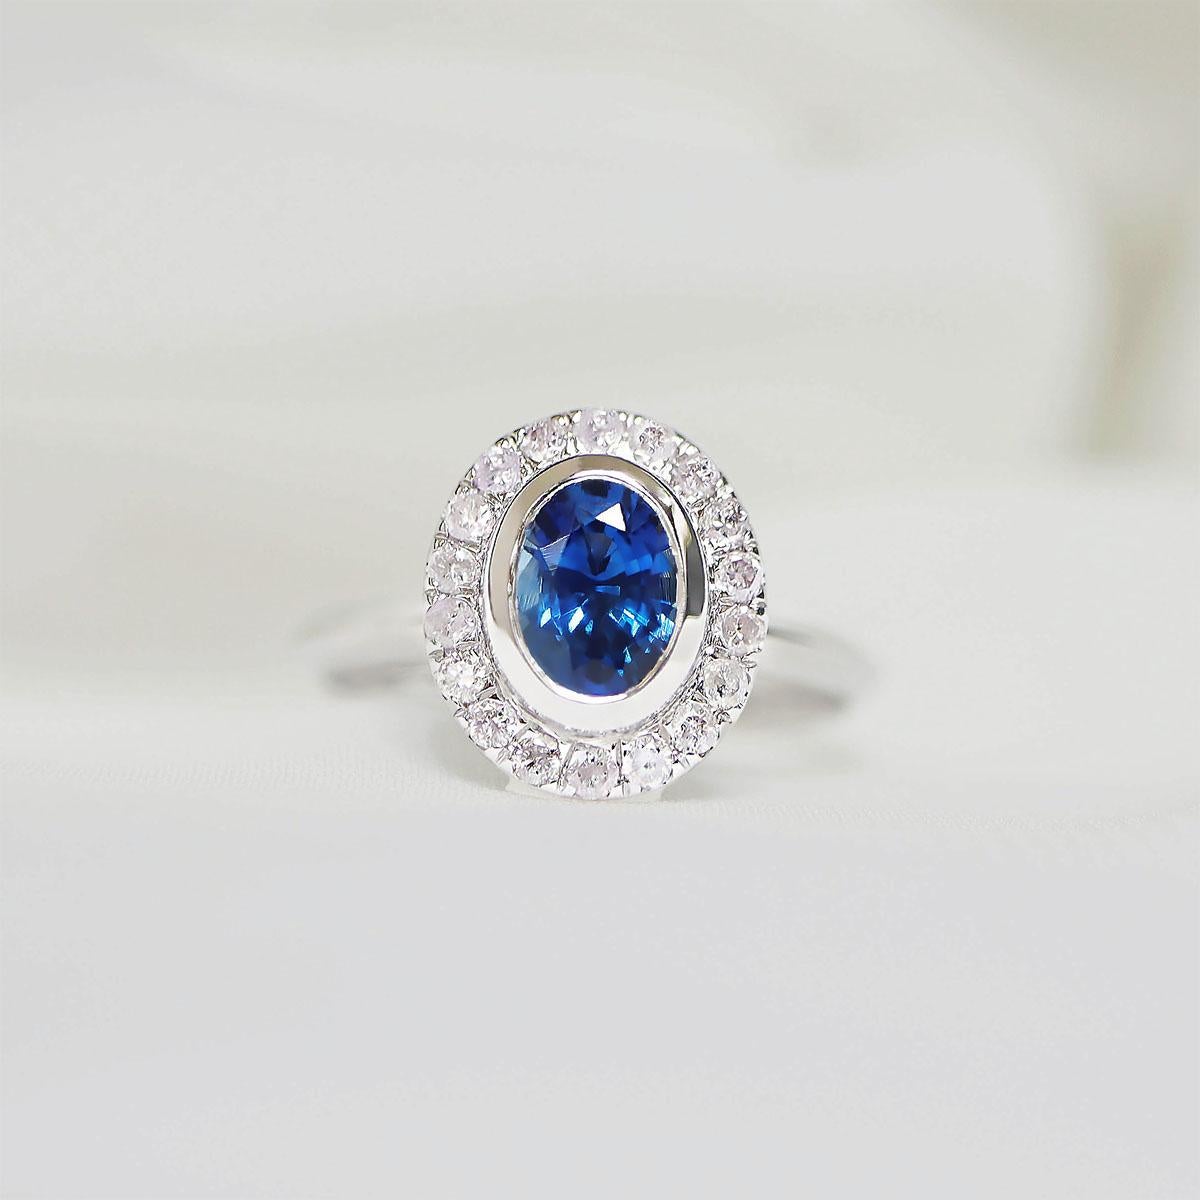 *IGI 14K 1.00 Ct Blue Sapphire&Pink Diamonds Antique Engagement Ring*

An IGI-certified natural intense blue sapphire weighing 1.00 ct is set on a 14K white gold pave design band with natural pink diamonds weighing 0.26 ct.  

The ring combines